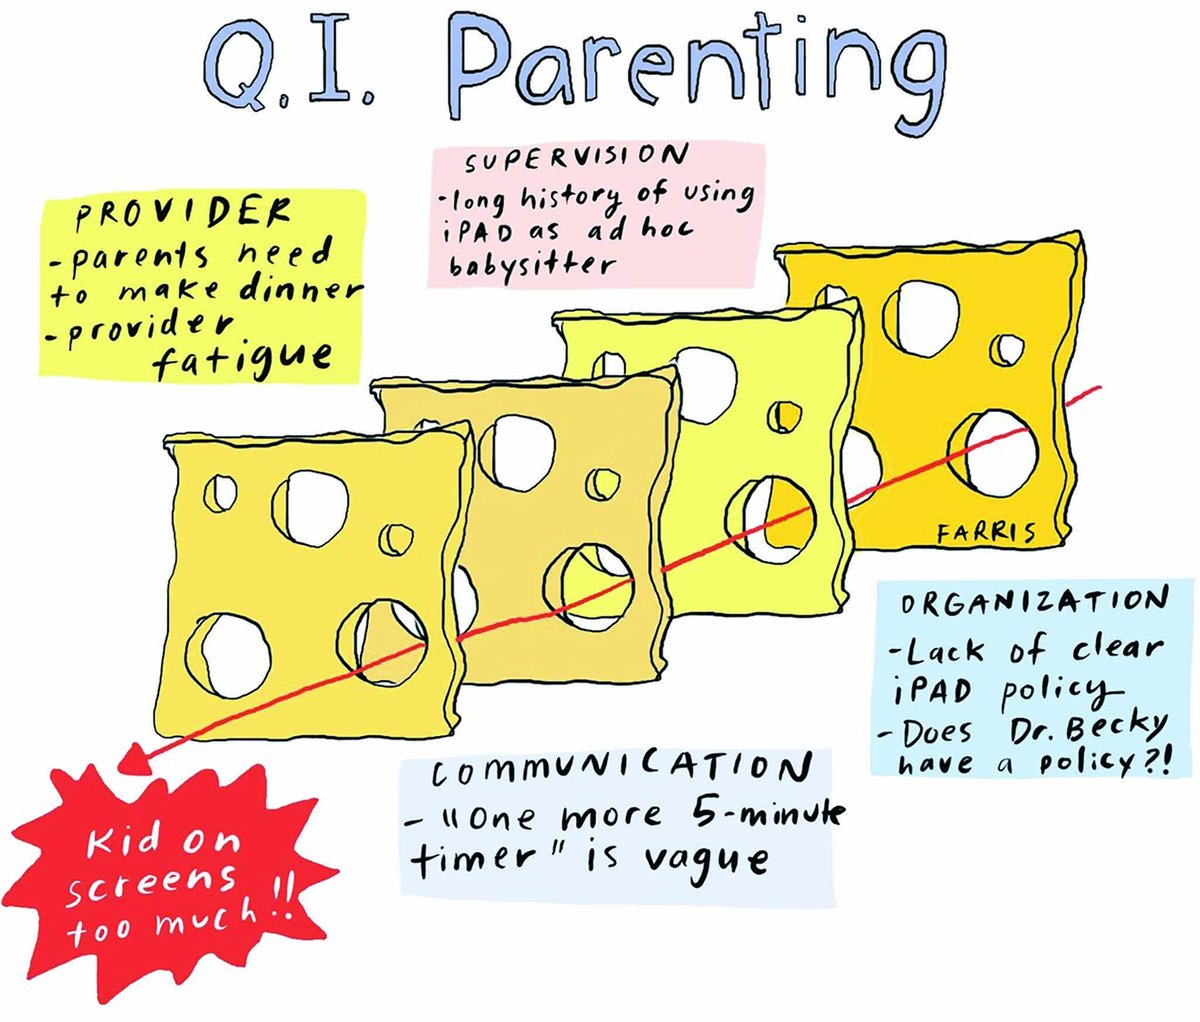 New #GraphicMedicine by Dr. Mom Grace Farris—'QI Parenting” ow.ly/uLb450Rp8yv